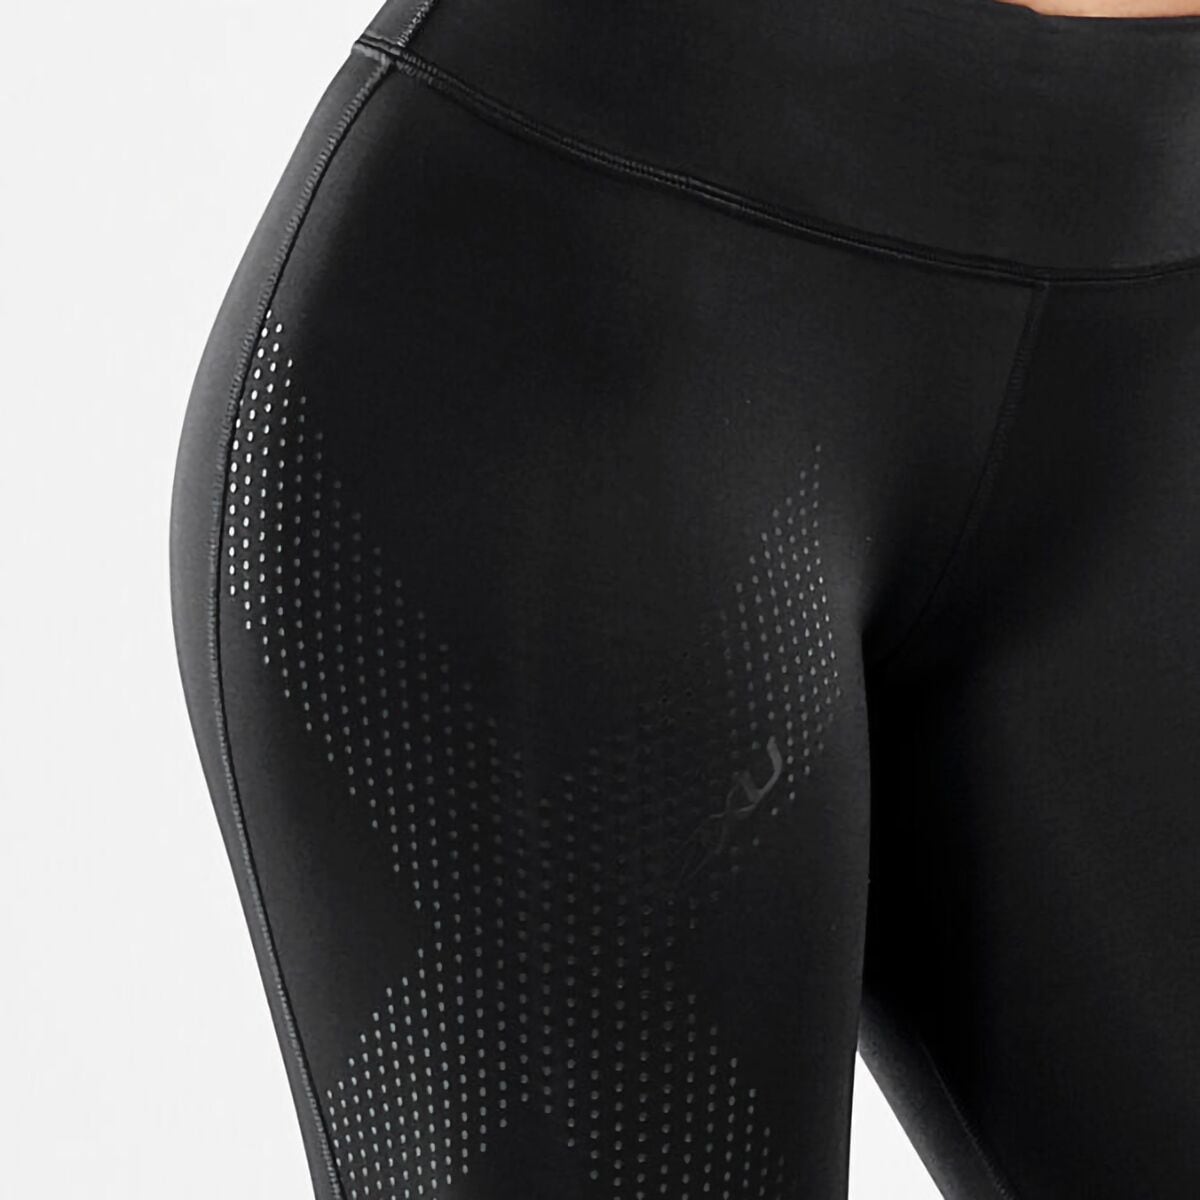 2XU Mid-Rise Compression Tights - Women's - Clothing